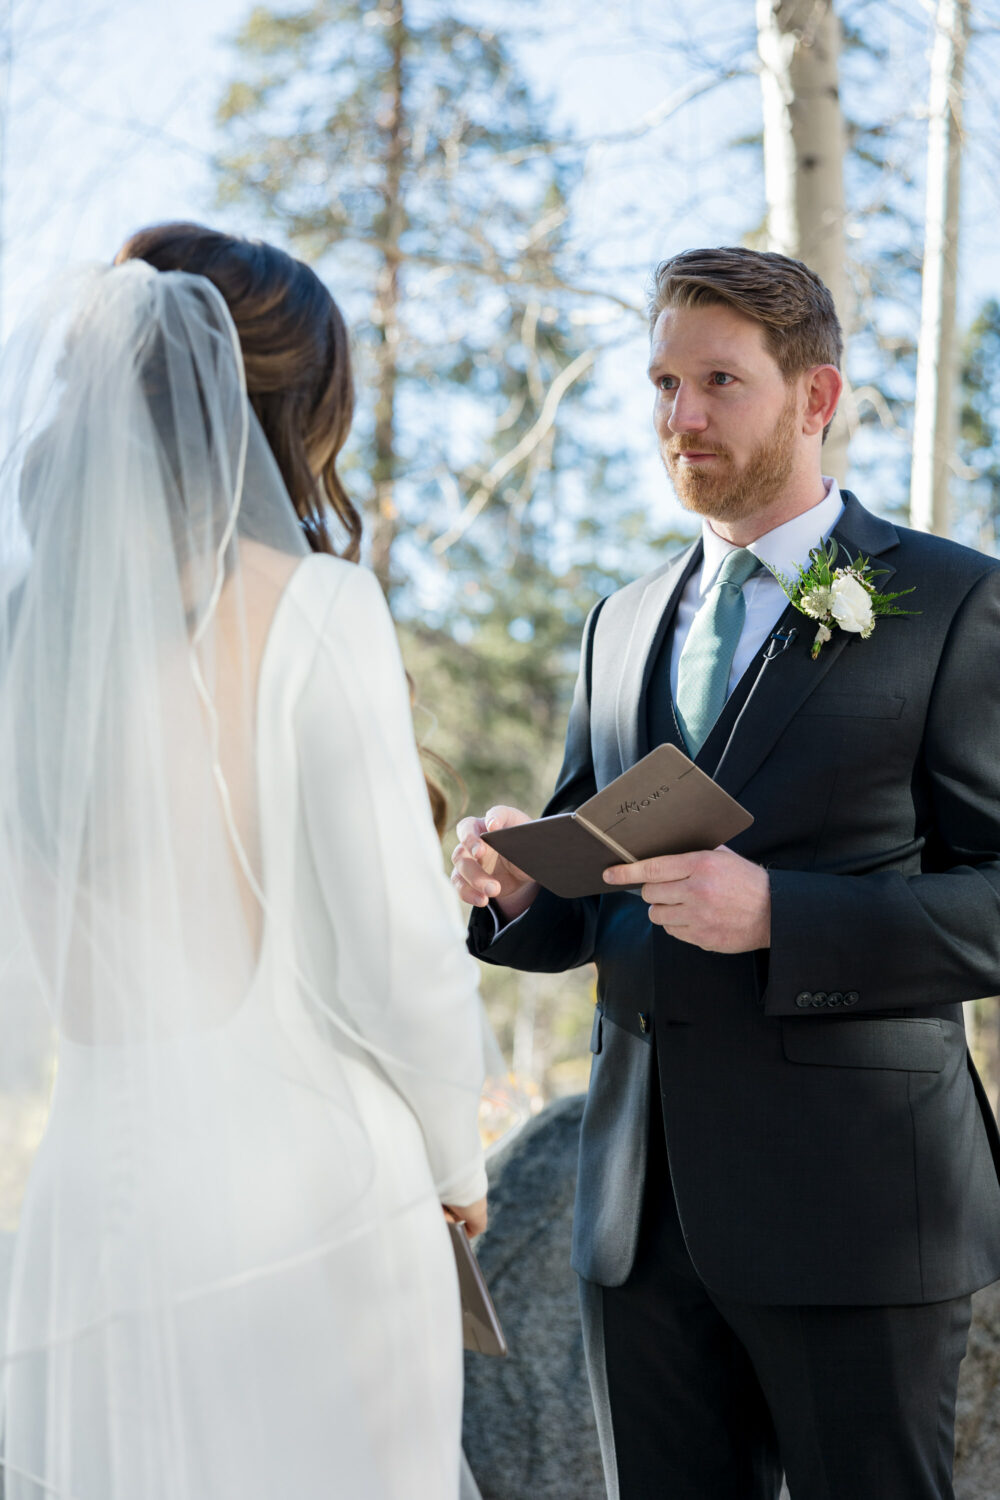 Small, handheld vow books are a photogenic keepsake.